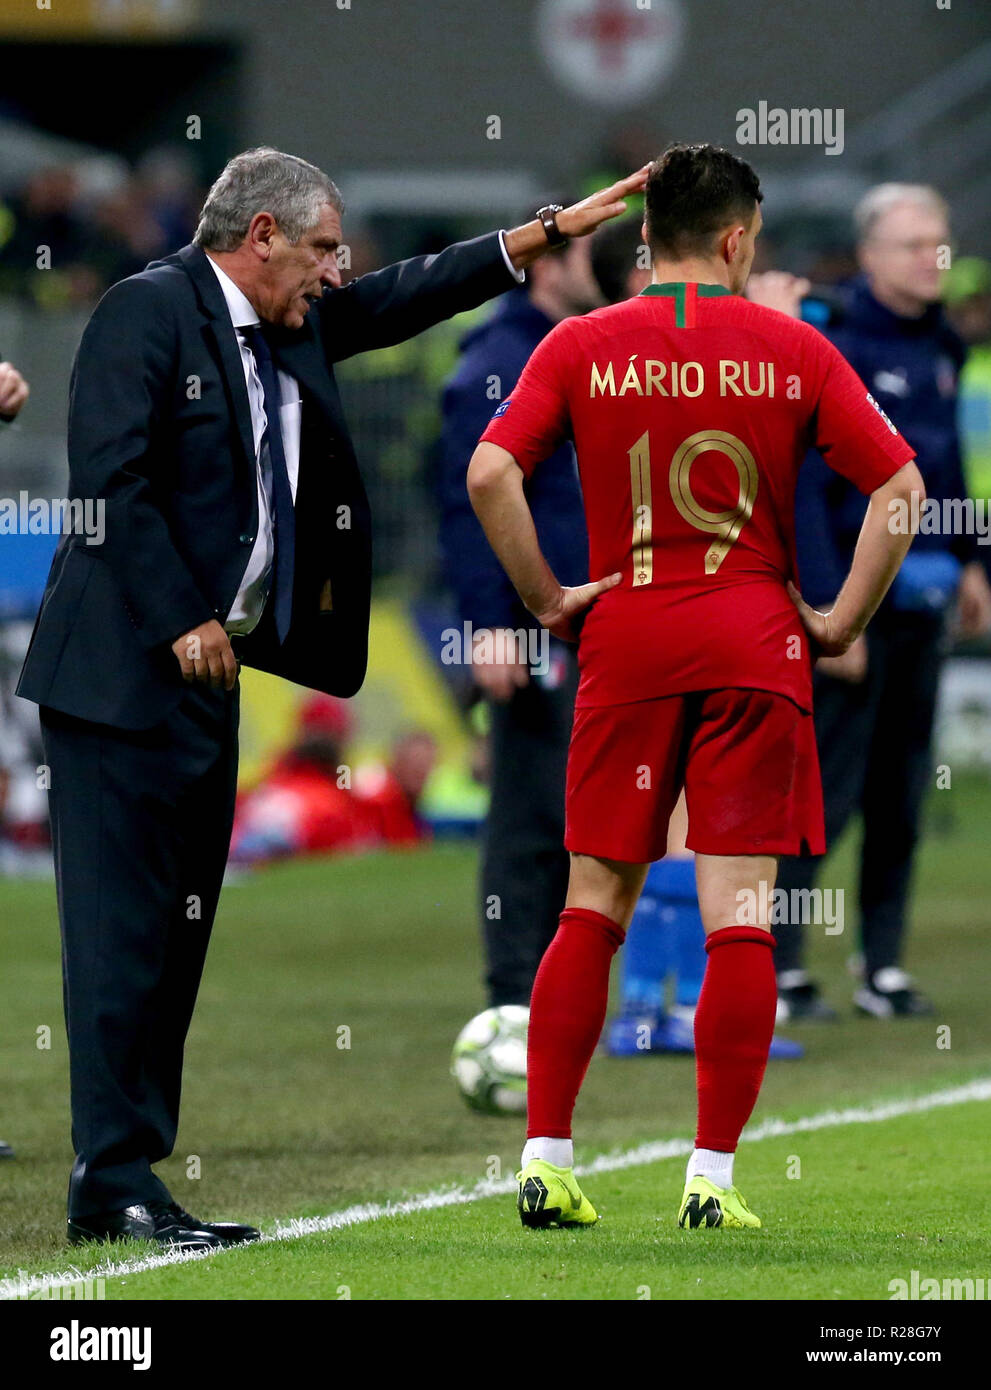 Mailand, Italy. 17th Nov, 2018. Soccer: Nations League A, group stage, group 3, 5th matchday. Fernando Santos (l), coach of Portugal, speaks to his player Mario Rui (r). Credit: Cezaro De Luca/dpa/Alamy Live News Stock Photo